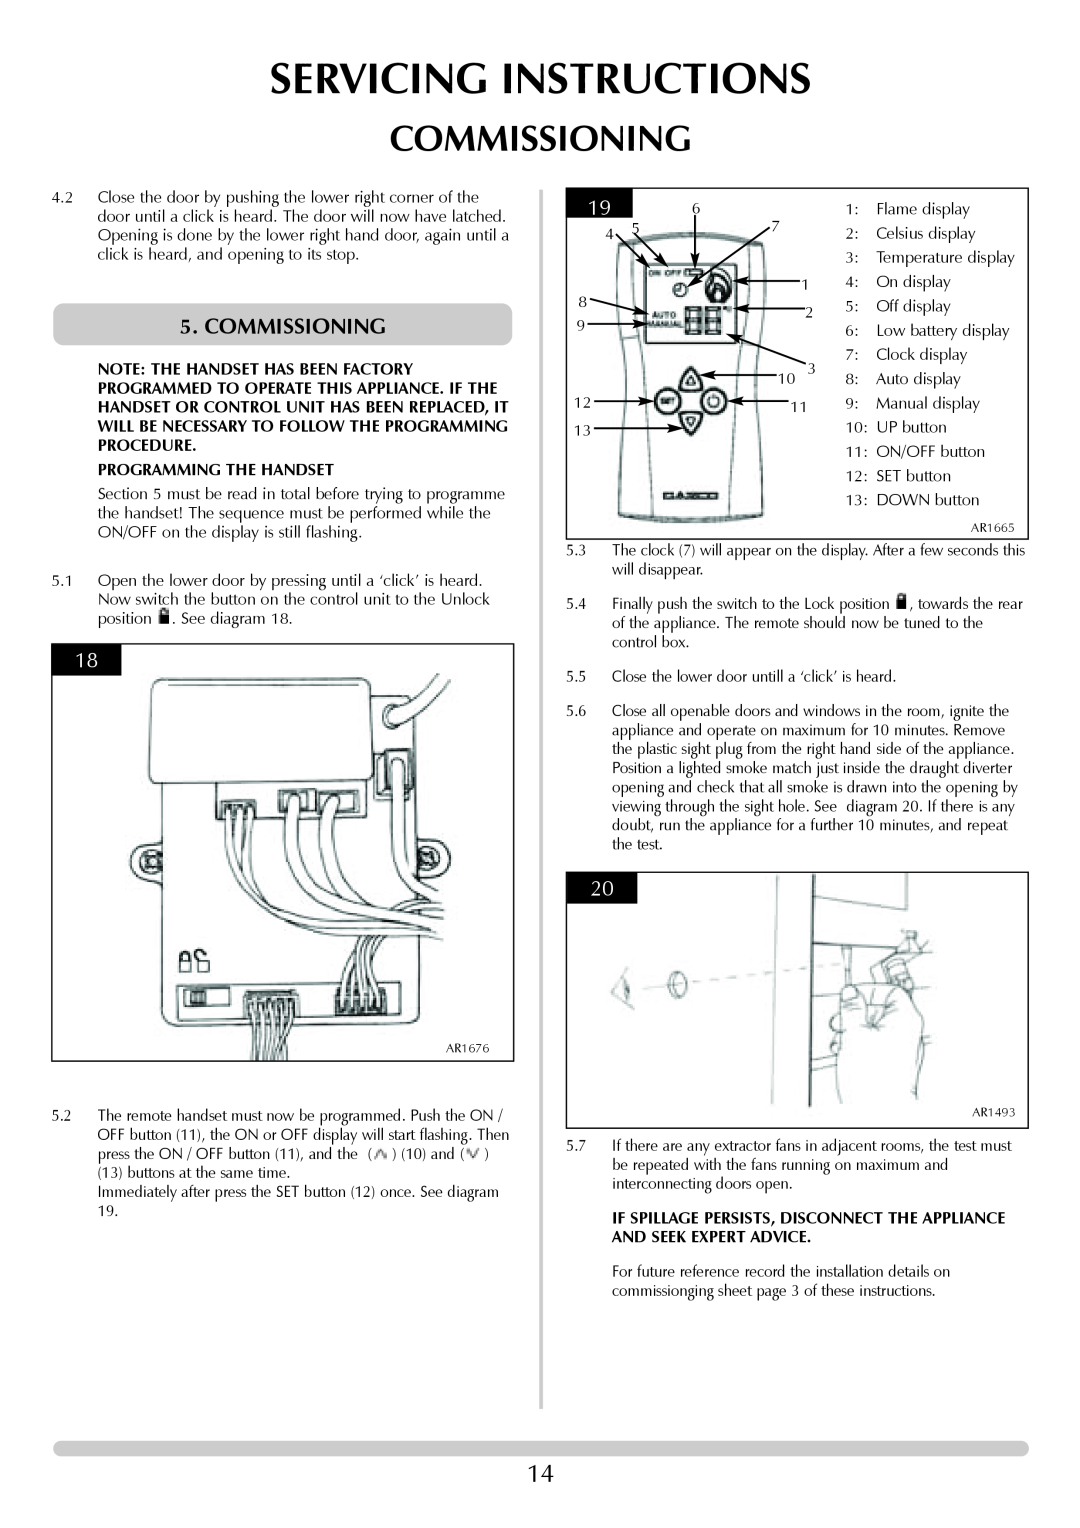 Stovax F40 manual Servicing Instructions, Commissioning 